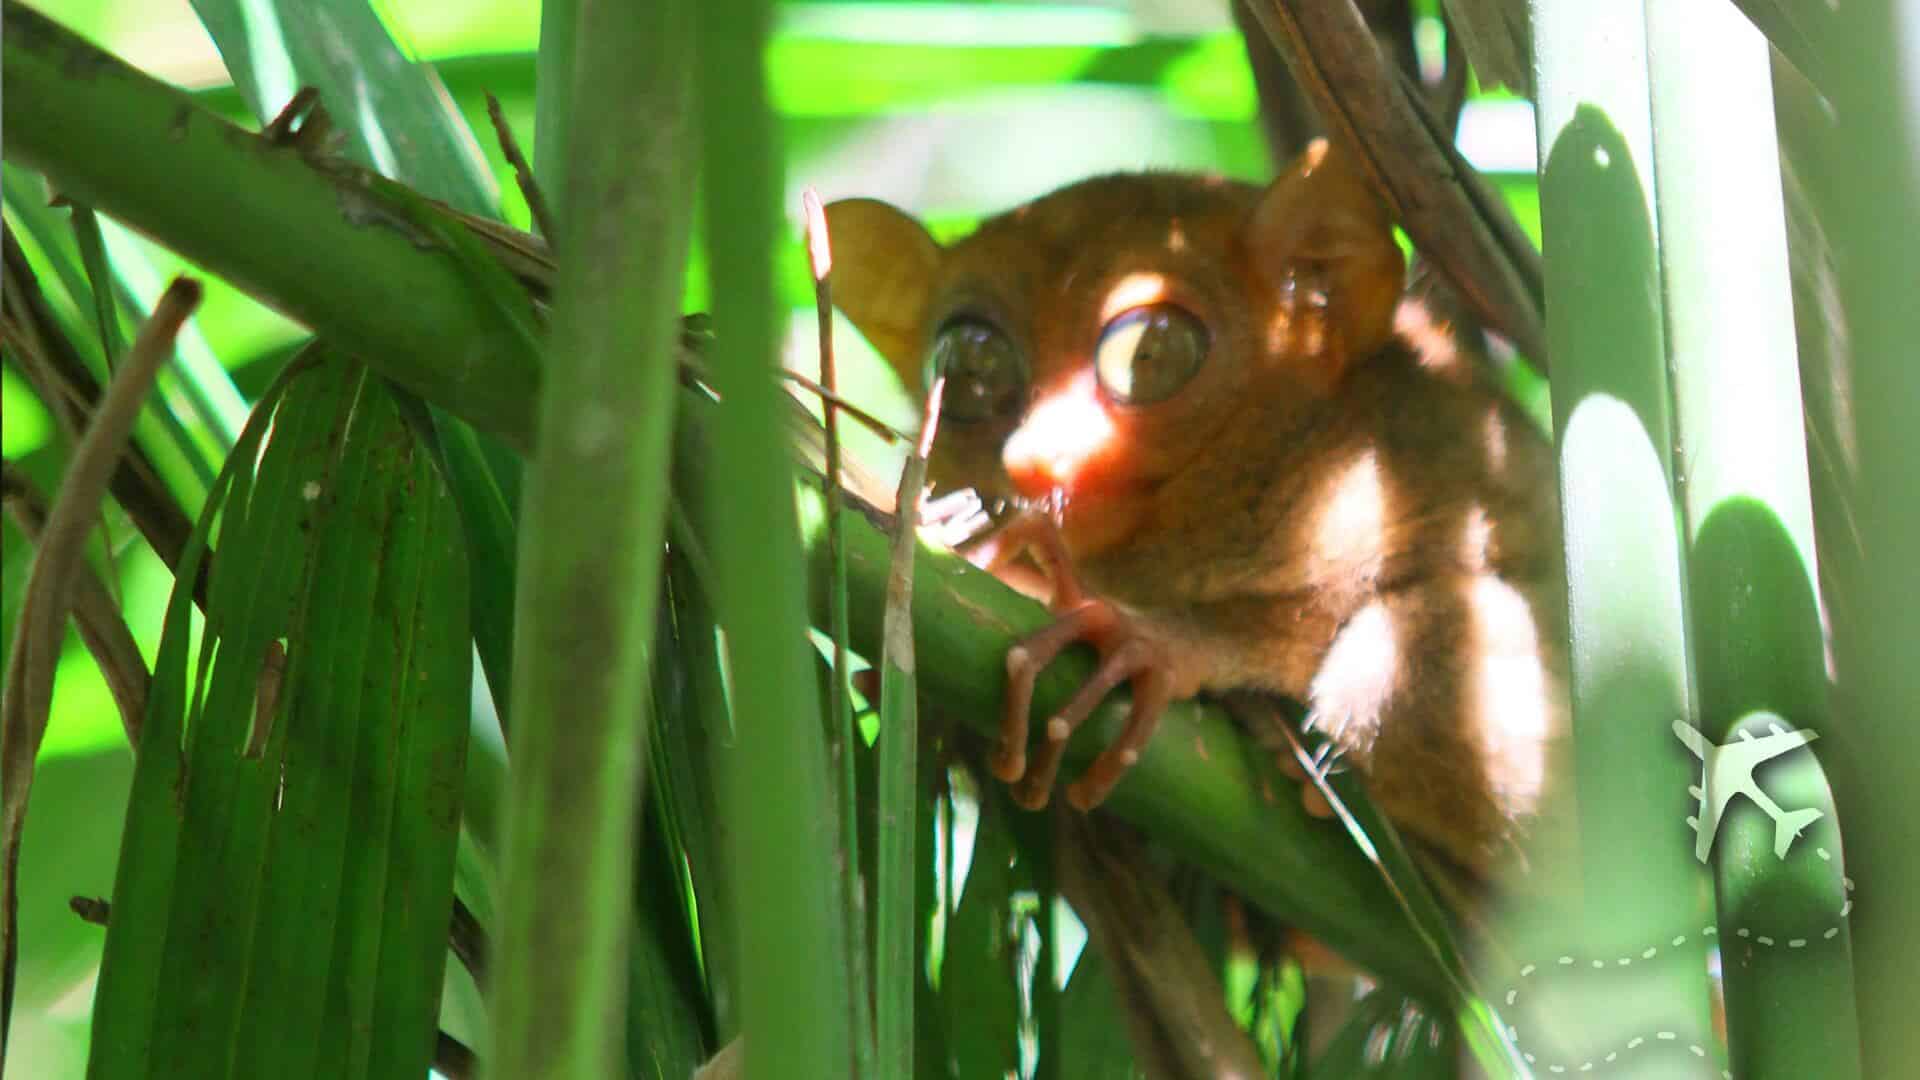 Young tarsier with large eyes